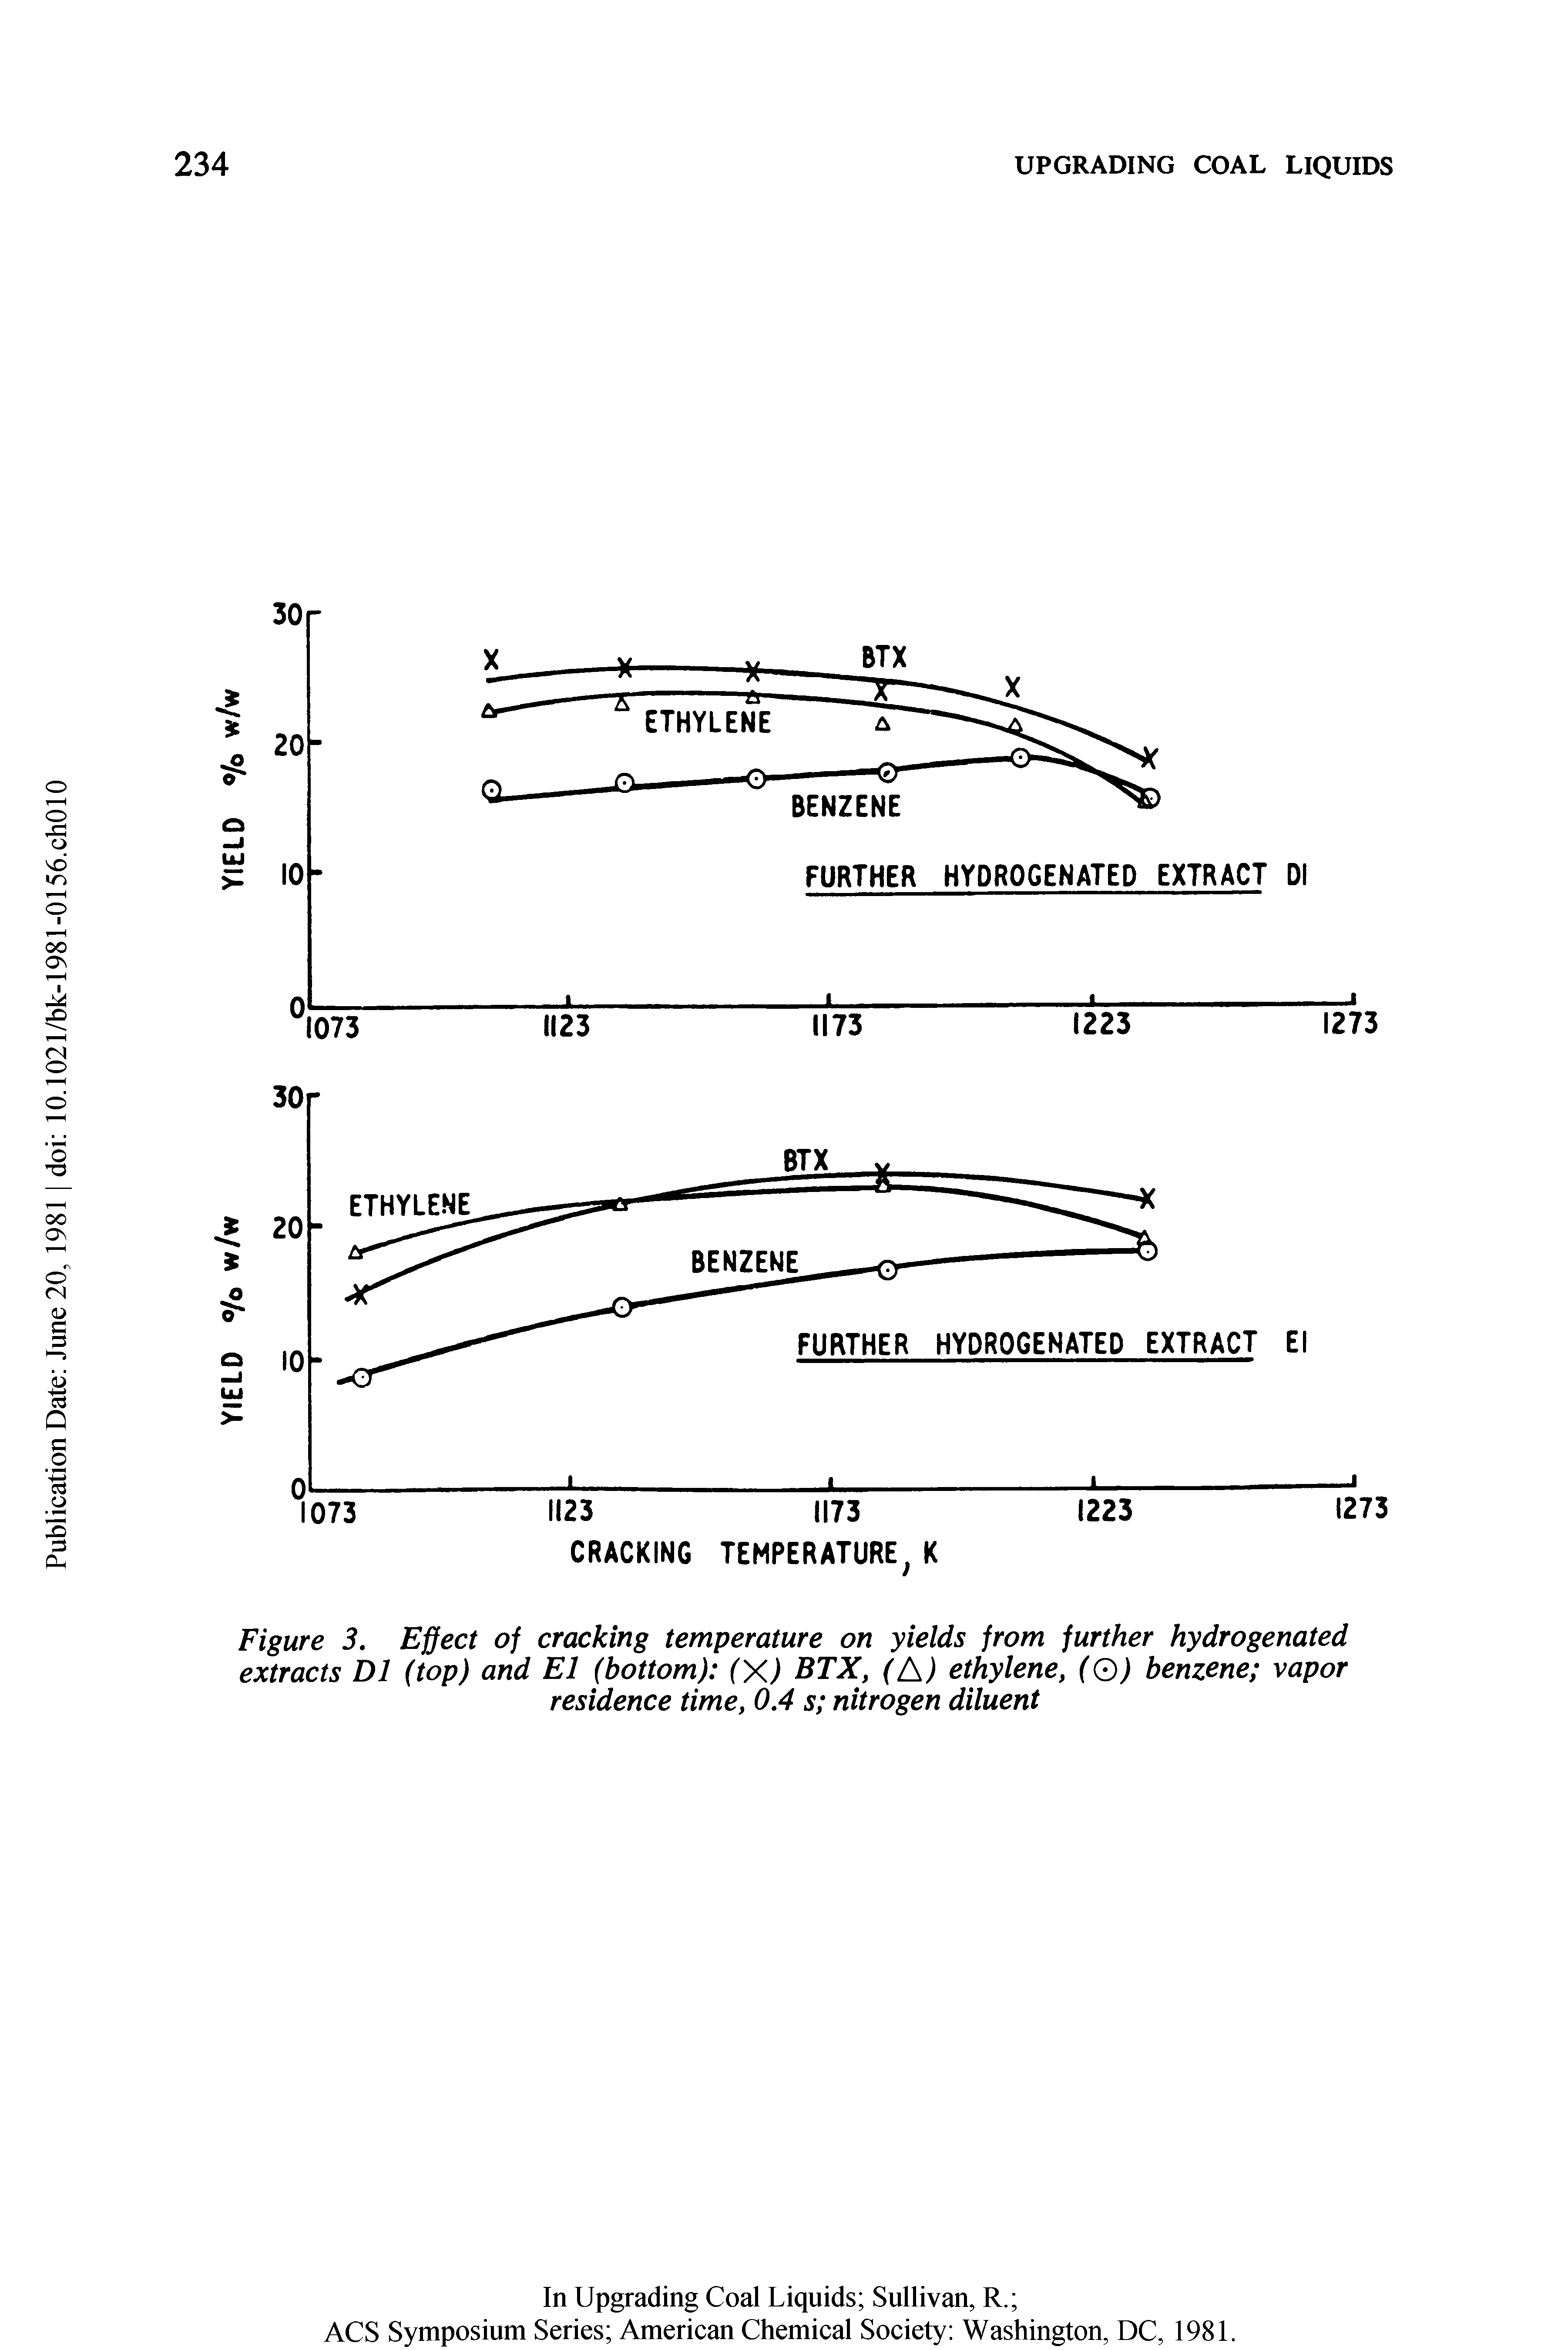 Figure 3. Effect of cracking temperature on yields from further hydrogenated extracts D1 (top) and El (bottom) (X) BTX, (A) ethylene, (O) benzene vapor residence time, 0.4 s nitrogen diluent...